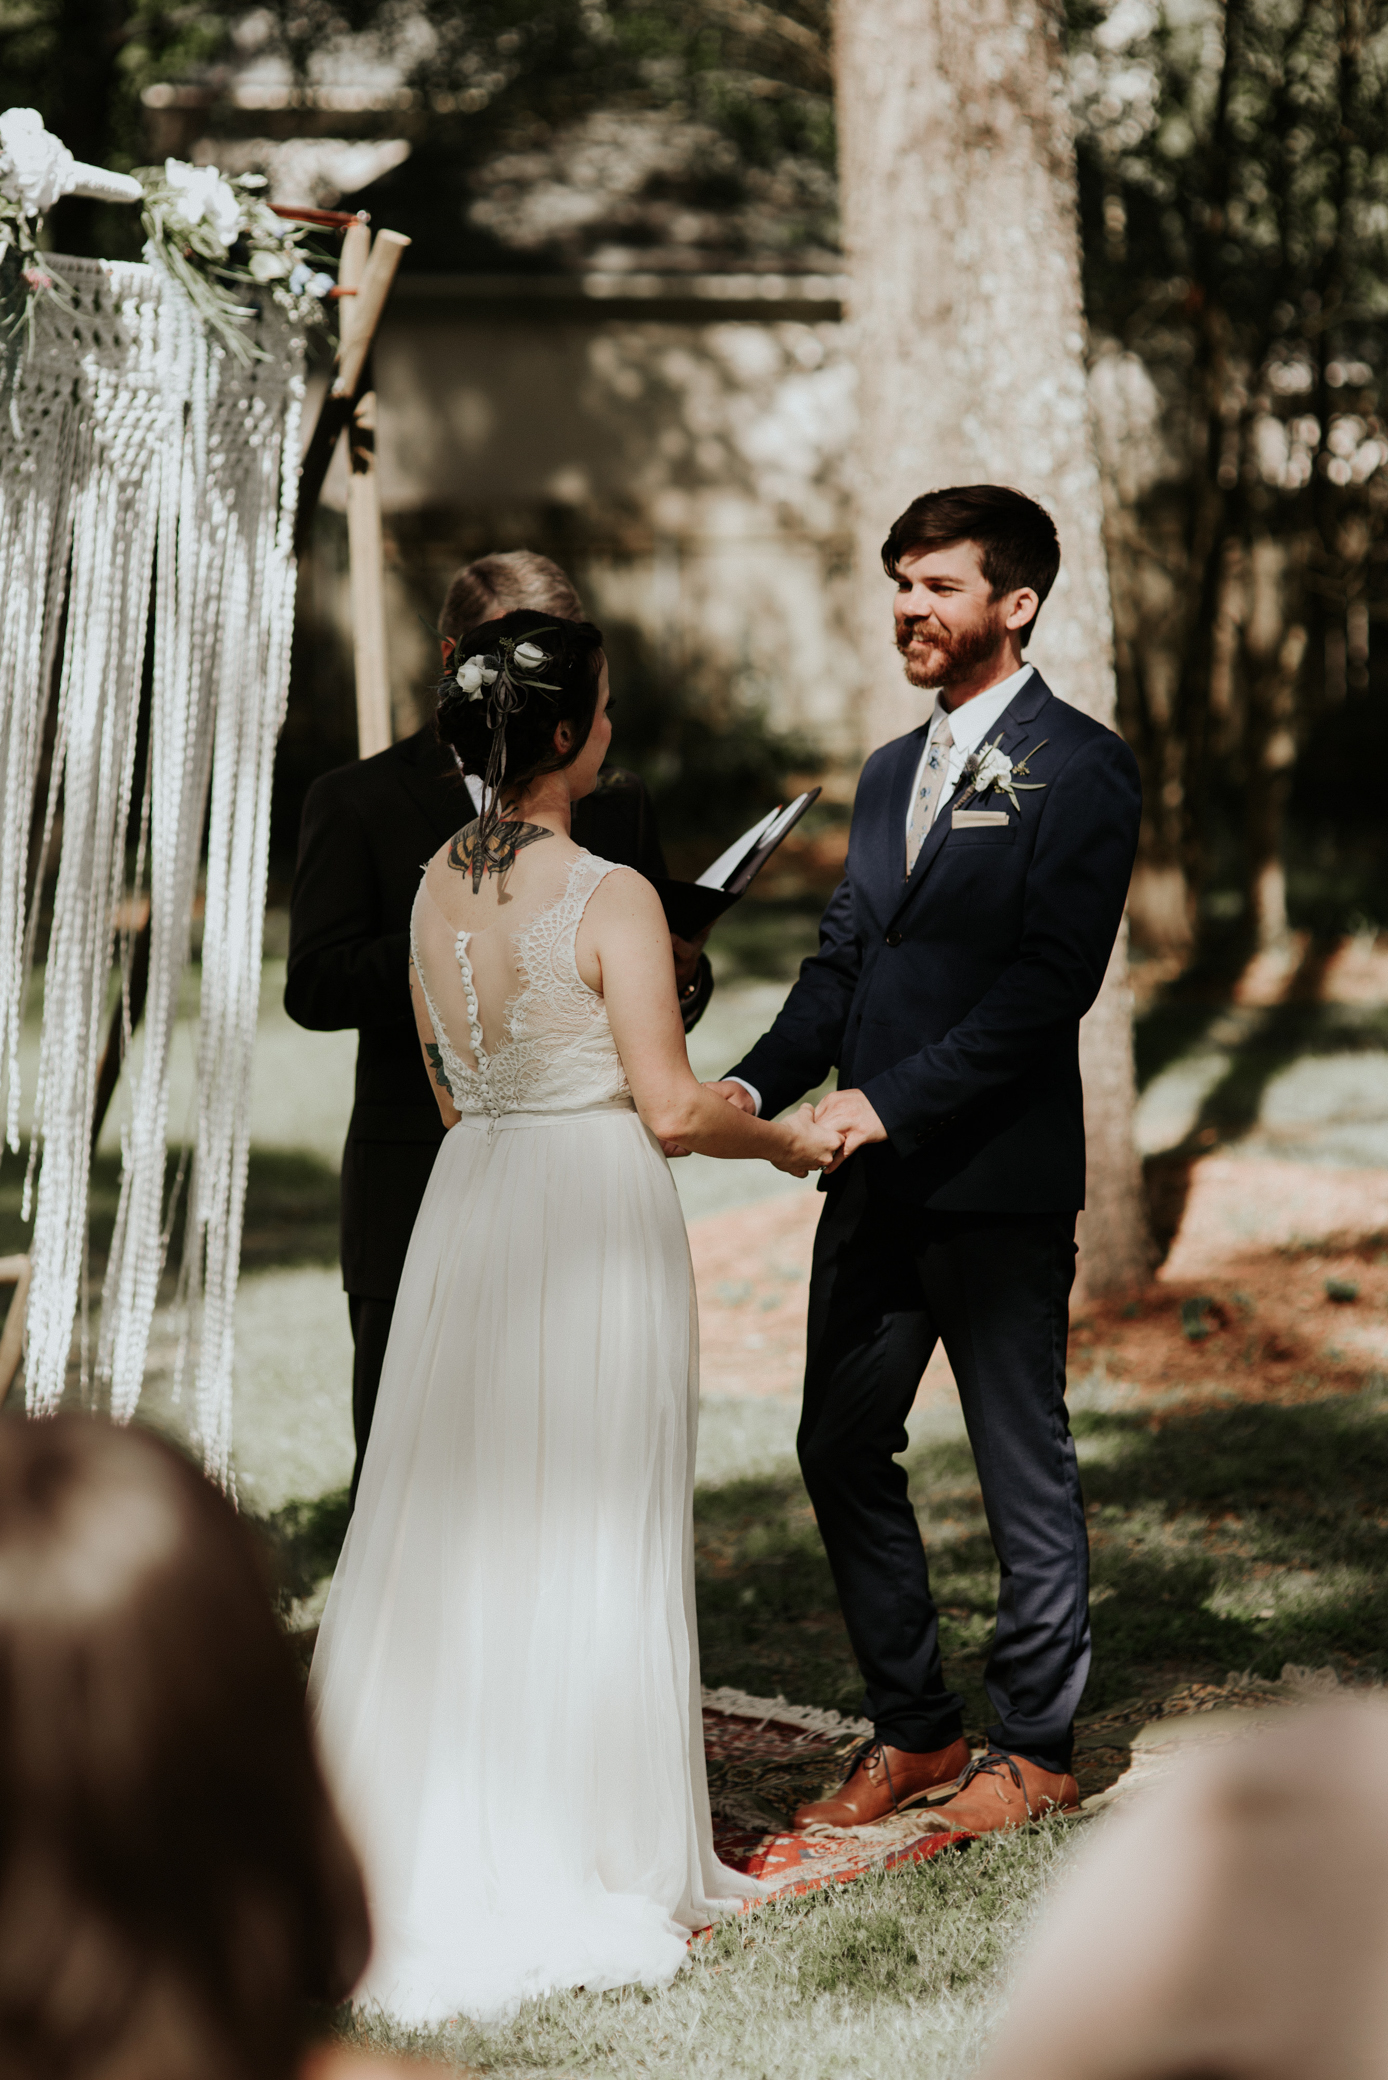 Eclectic Bohemian Wedding in Jackson, MS at The Cedars